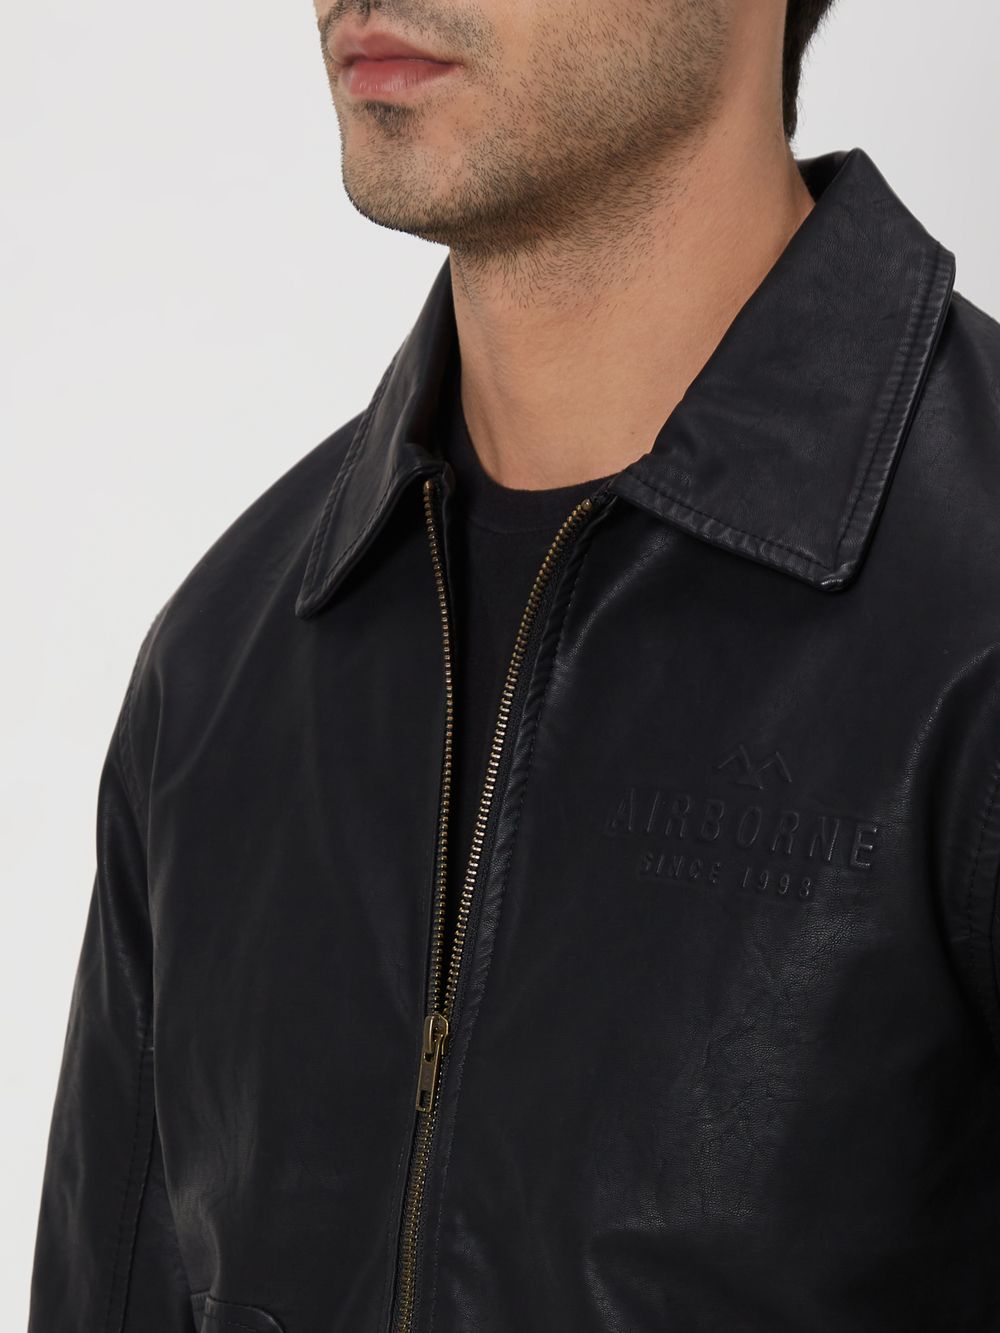 Black Faux Leather Jacket With Embossed Branding